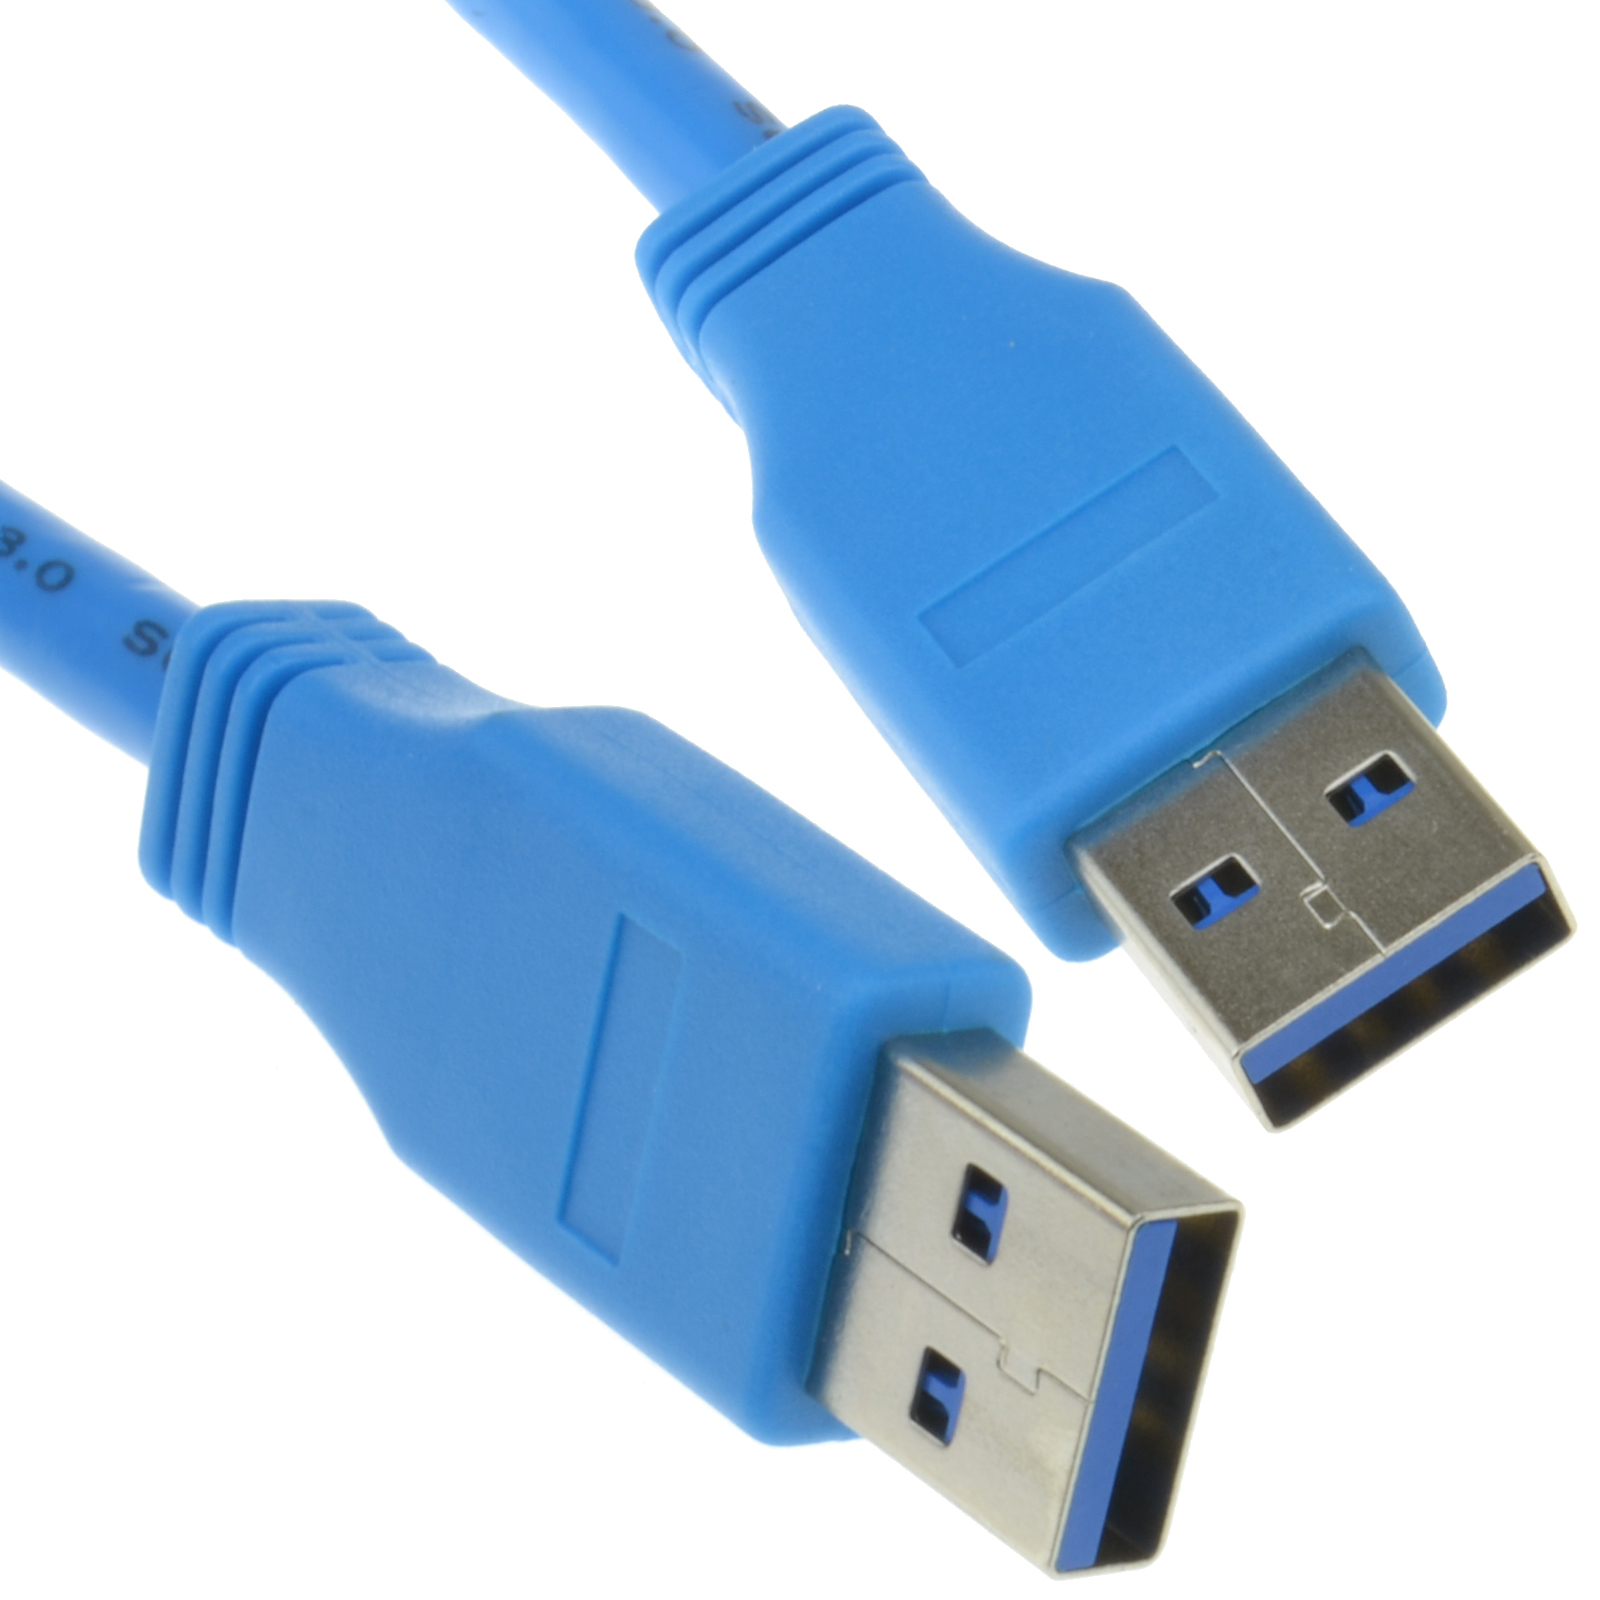 USB 3.0 SuperSpeed Type A Plug to A Plug Cable Lead Blue 0.5m 50cm ...